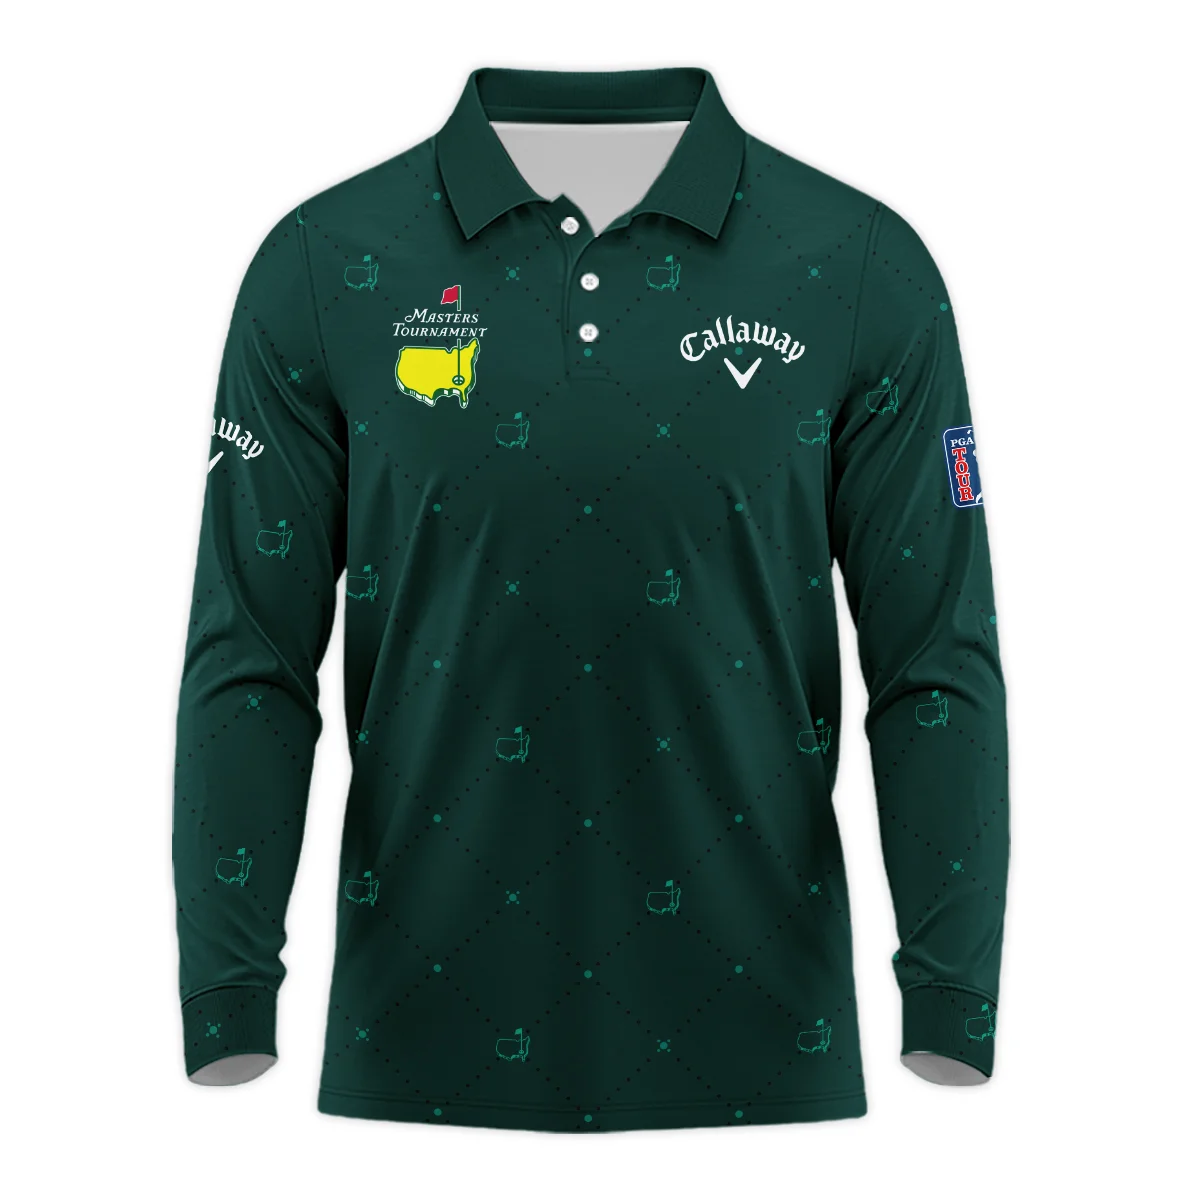 Dark Green Pattern In Retro Style With Logo Masters Tournament Callaway Vneck Polo Shirt Style Classic Polo Shirt For Men